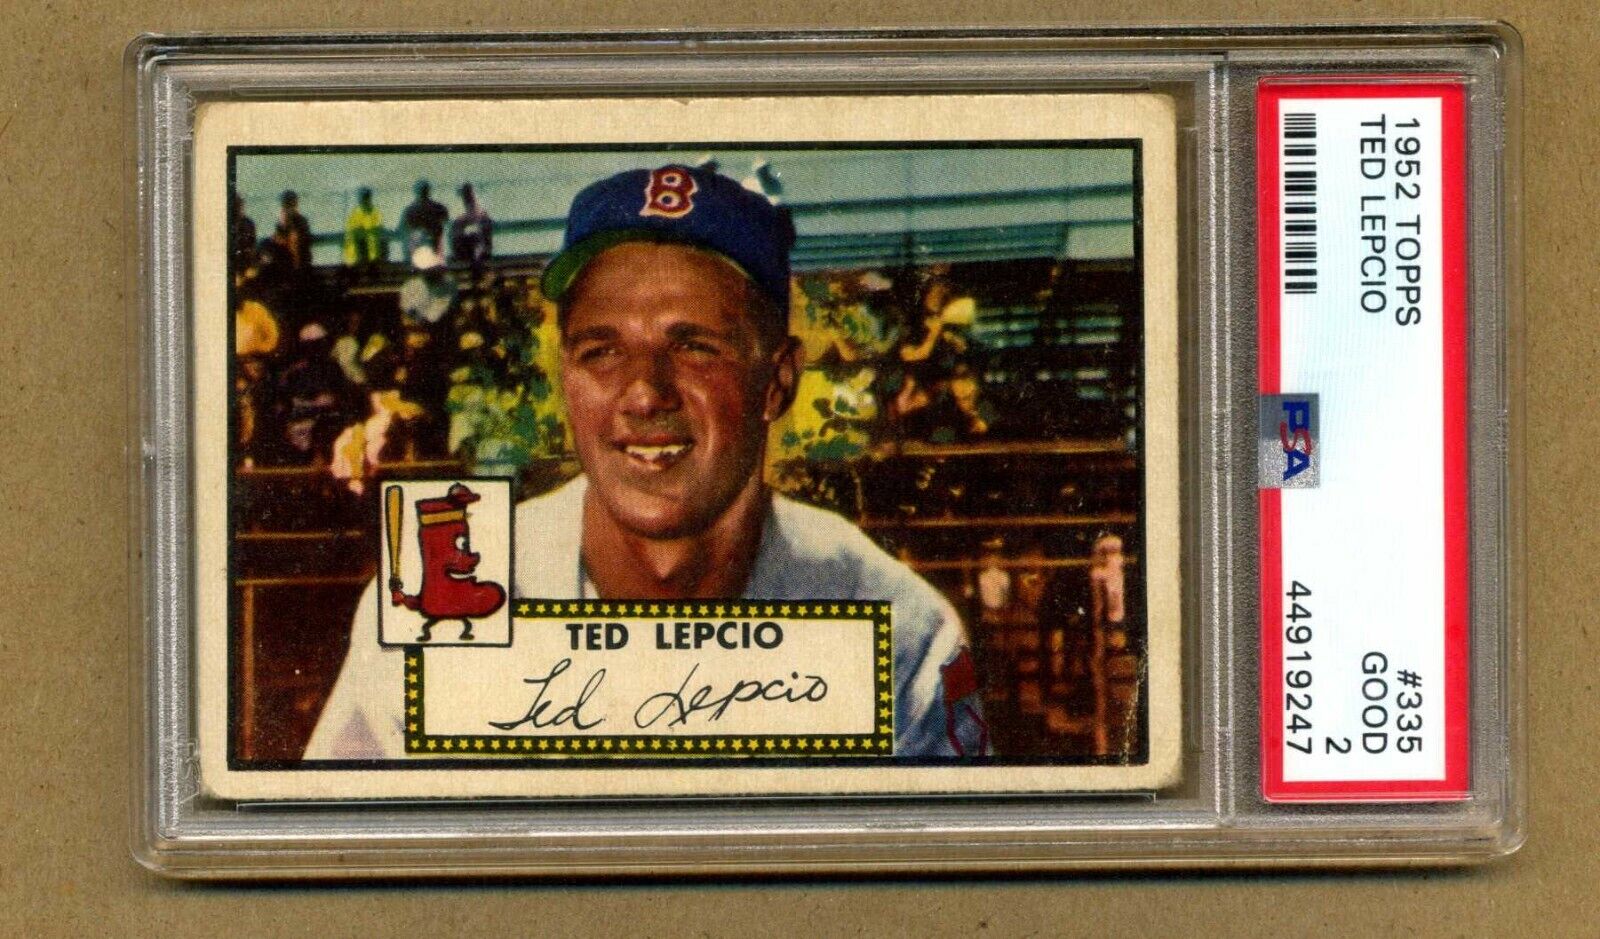 1952 Topps #335 Ted Lepcio Boston Red Sox PSA 2 High Number